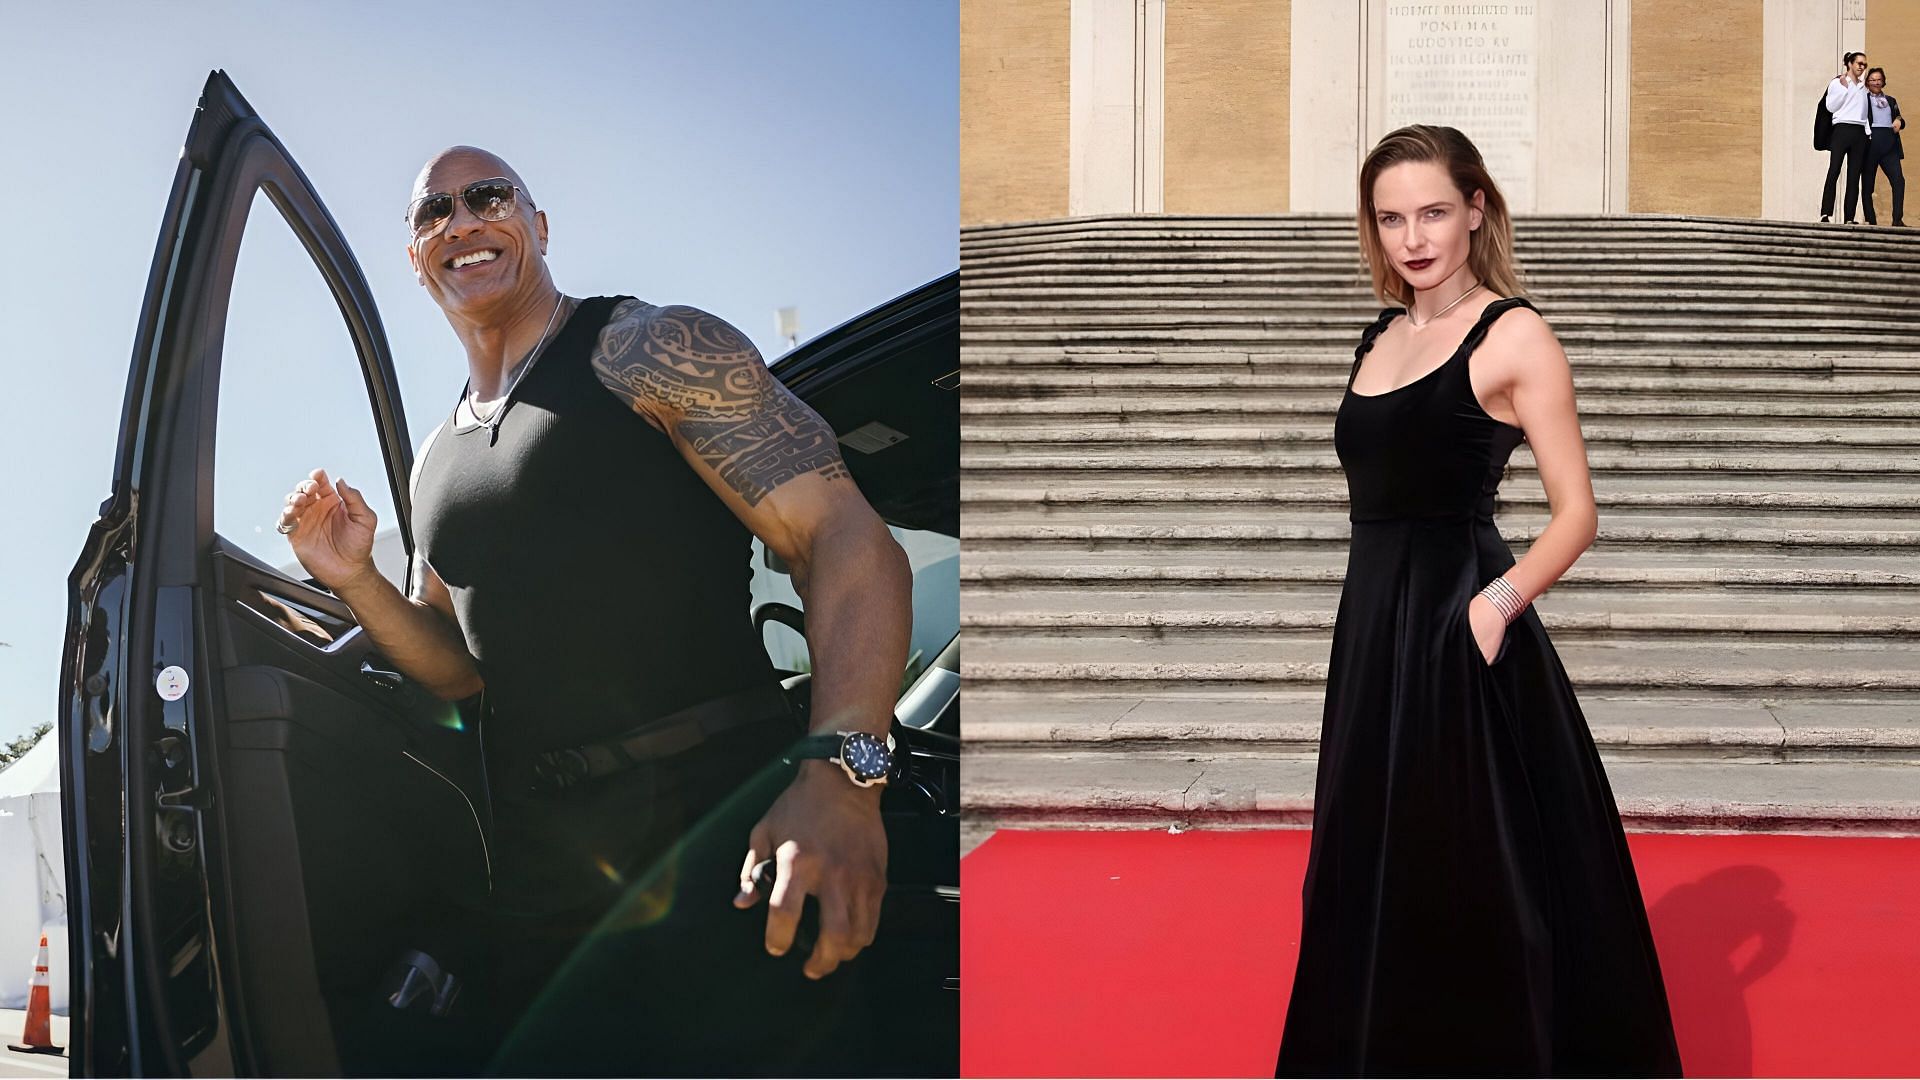 The pair have been friends and colleagues for a long time. (Image via Instagram/@TheRock and @Rebecca_Ferguson)